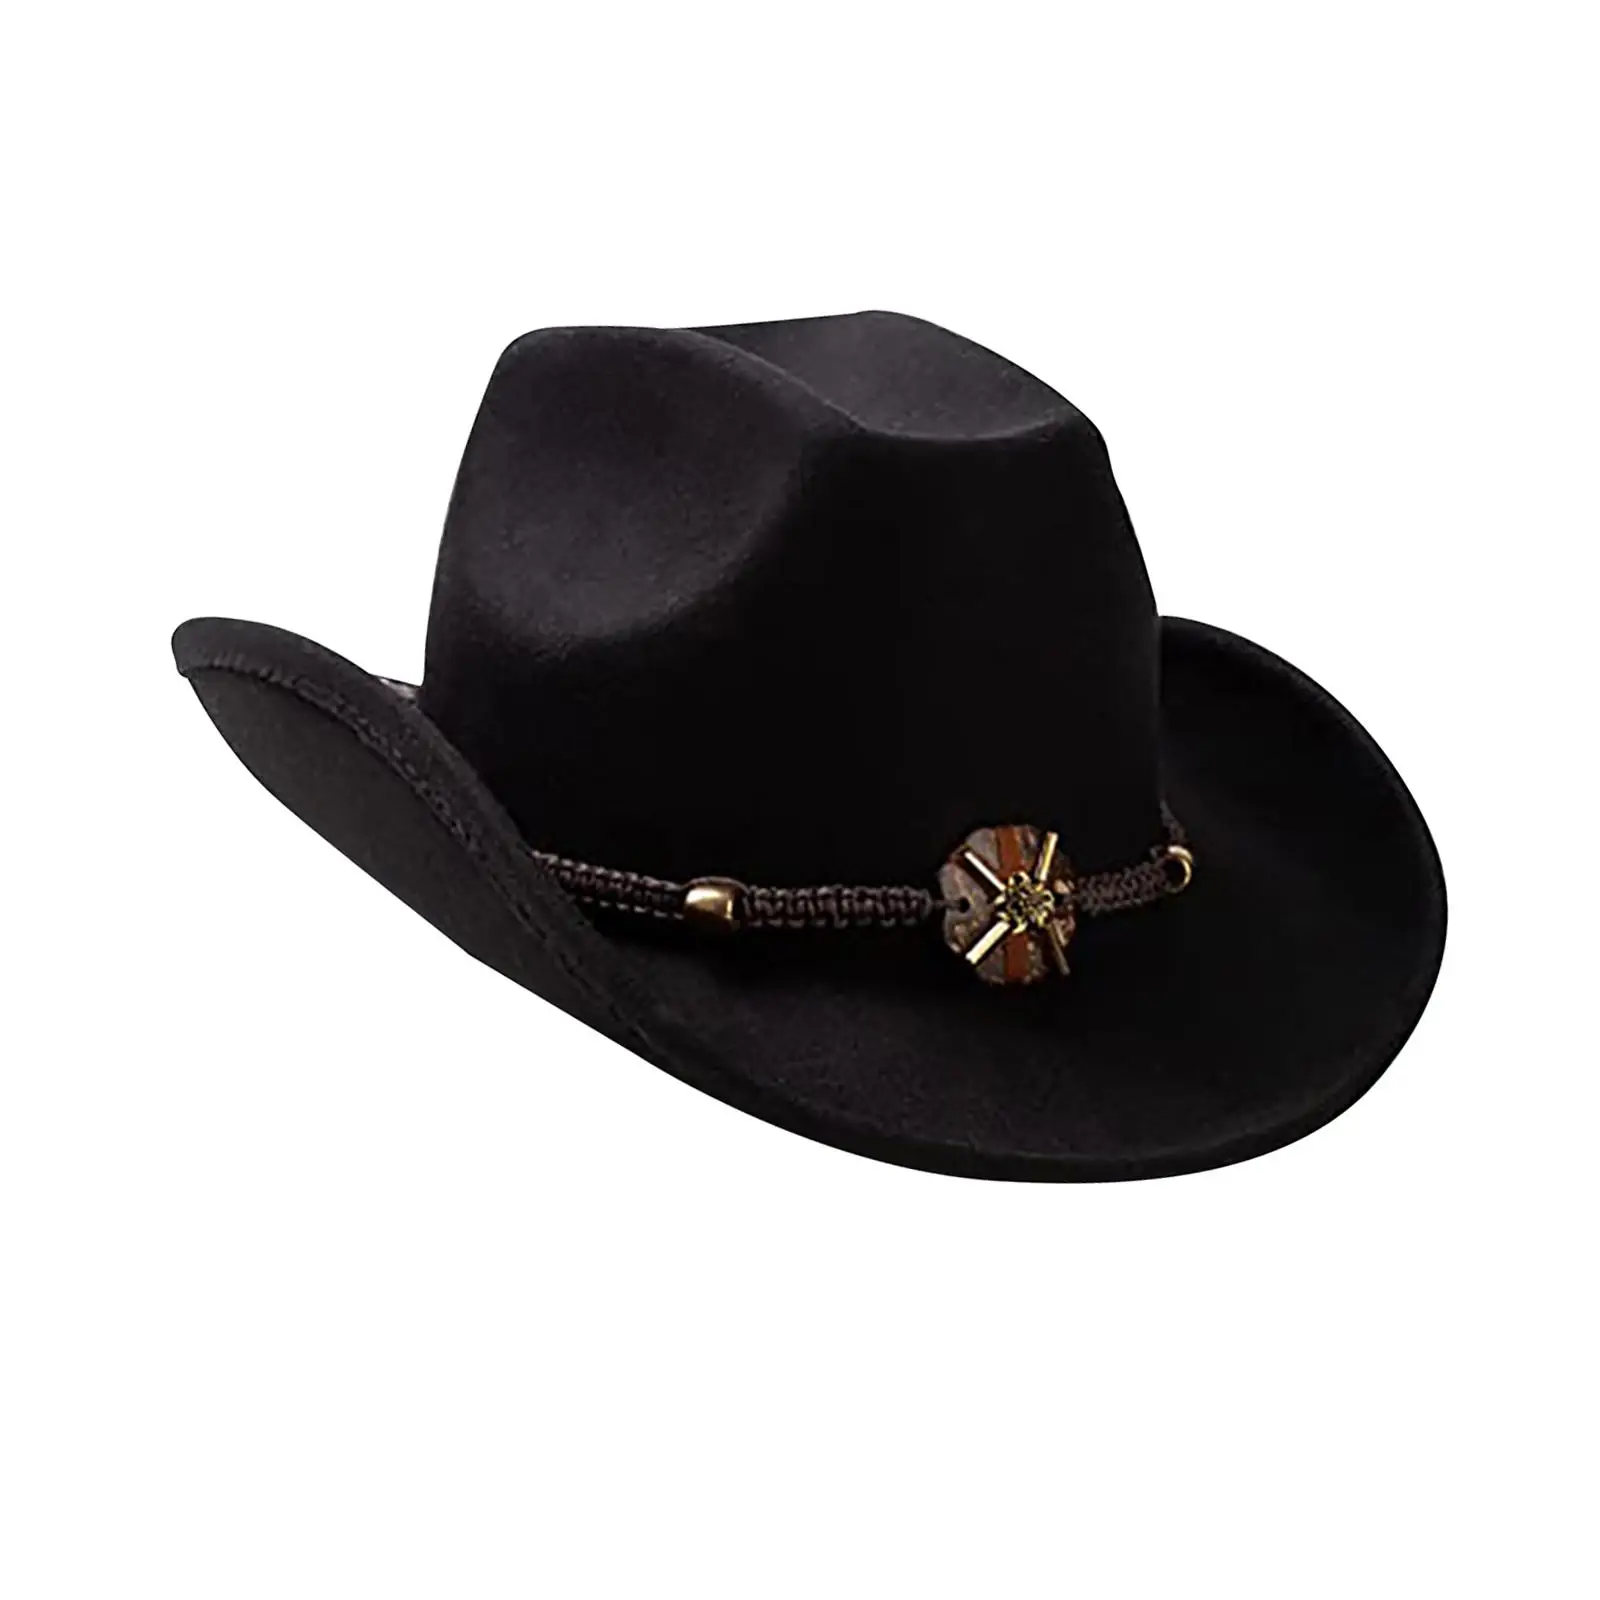 Casual Western Cowboy Hat Big Brim Photo Props Fancy Dress Costume Sun Hats Cosplay for Adults Teens Camping Play Fishing